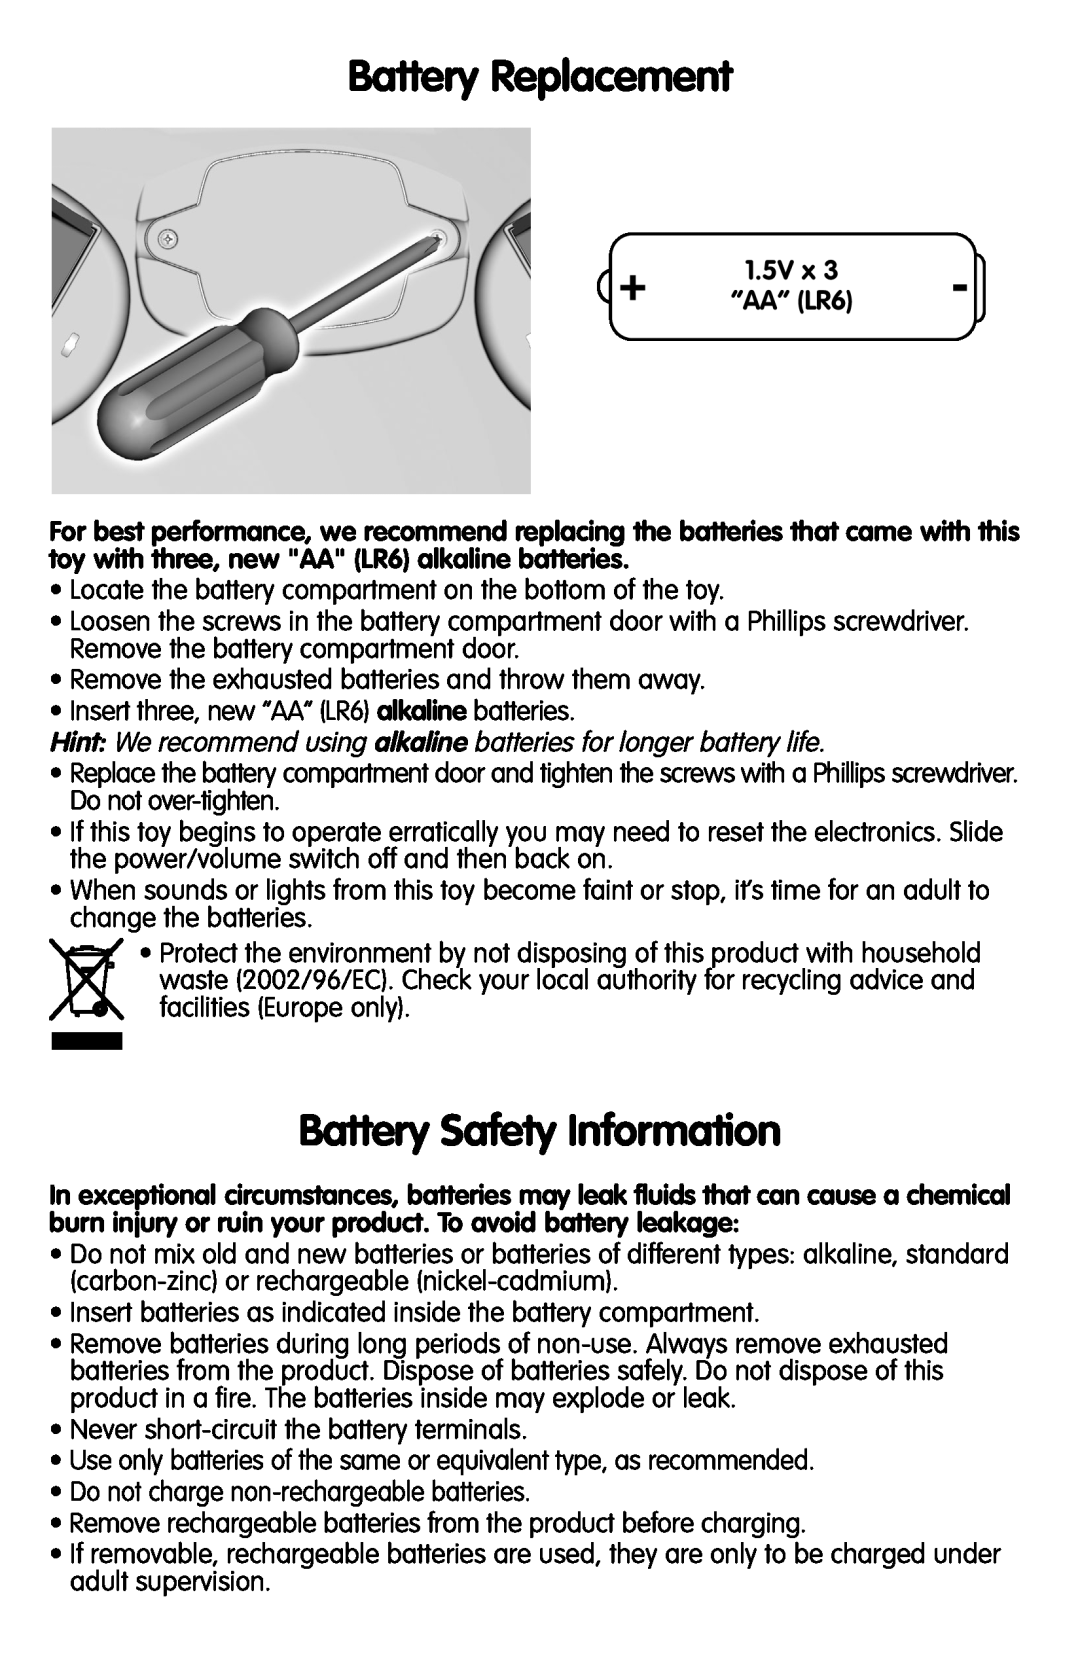 Fisher-Price T6076 instruction sheet Battery Replacement, Battery Safety Information 